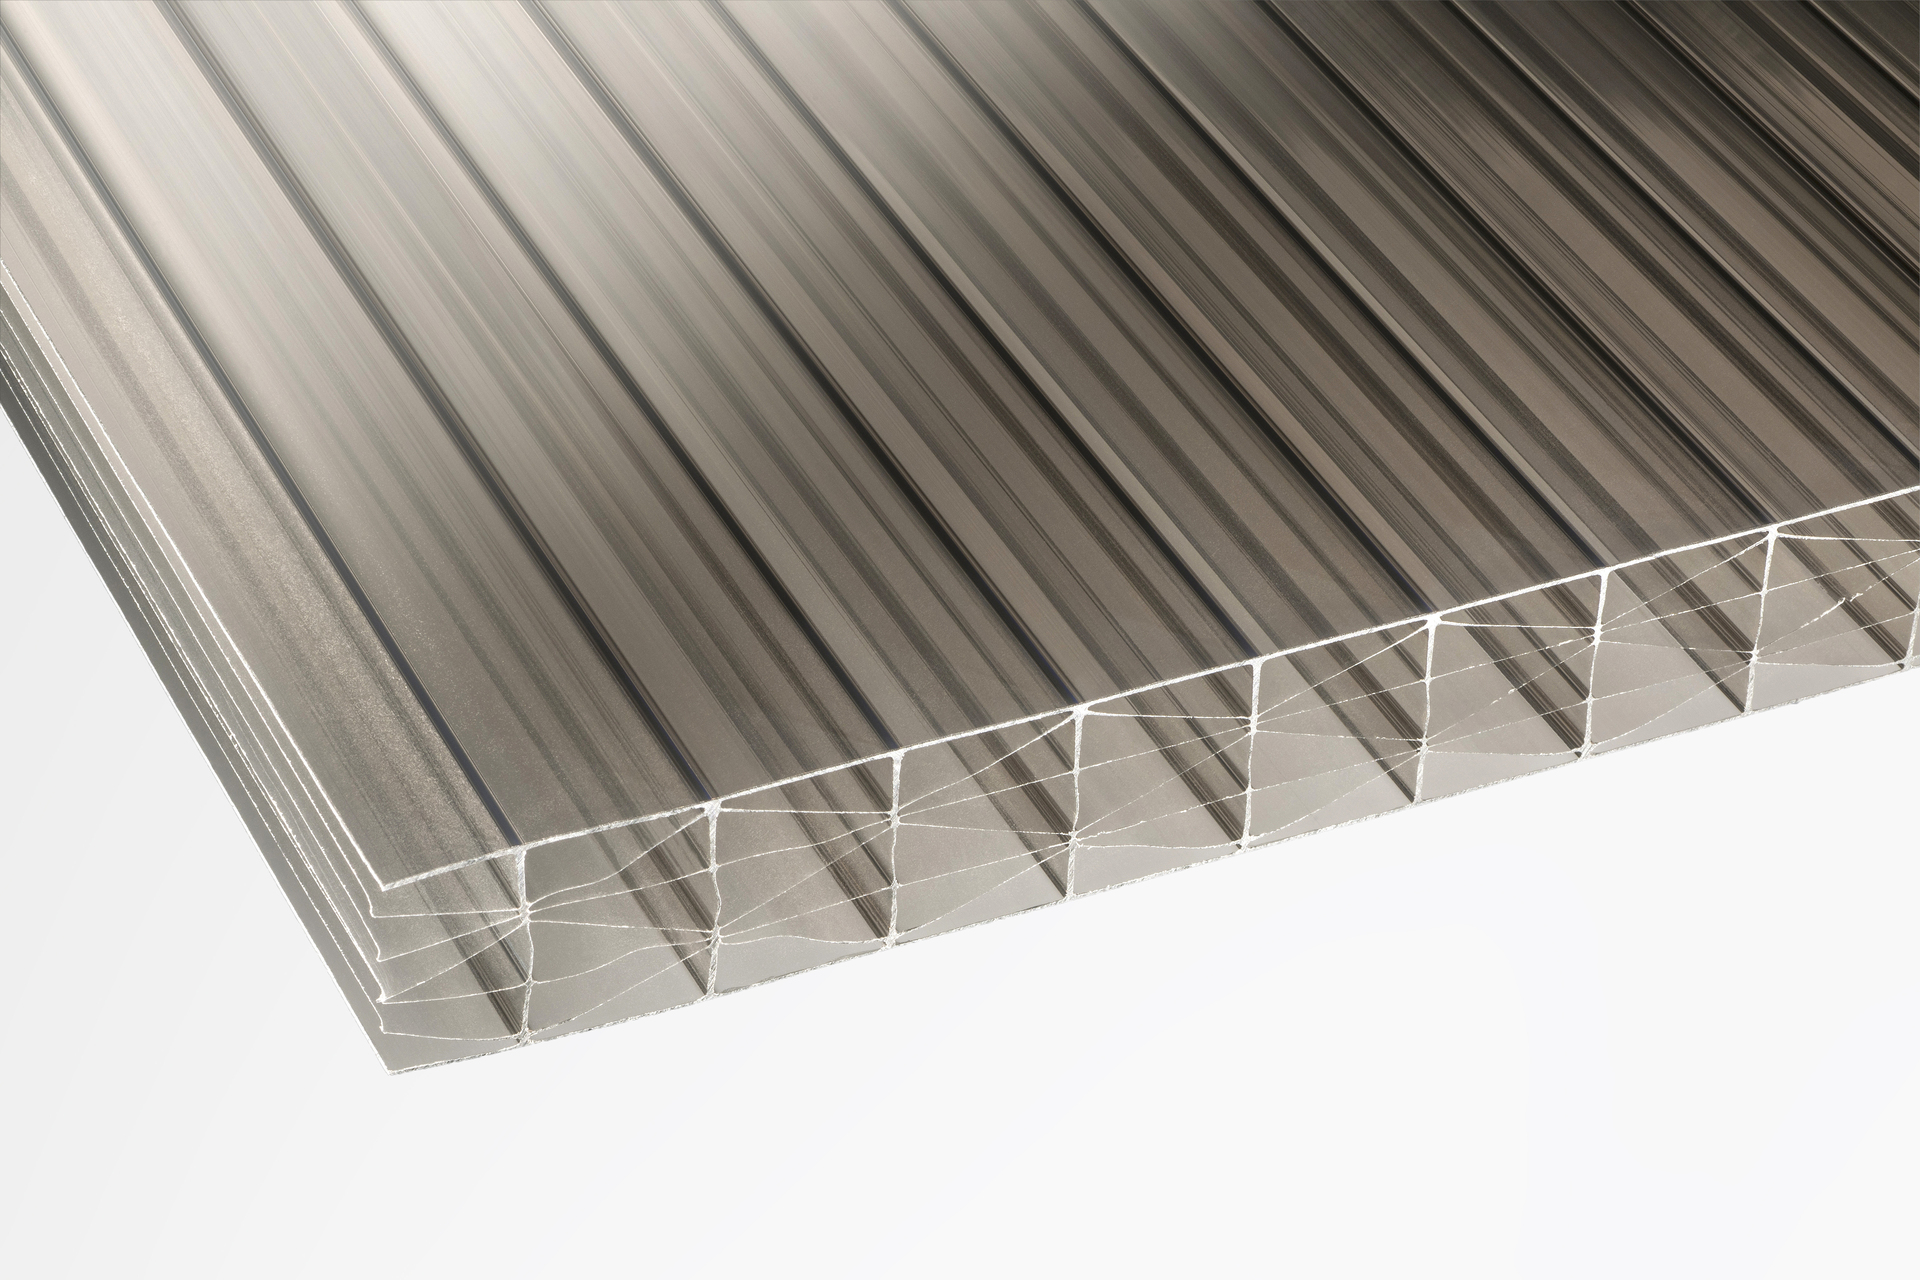 Image of 25mm Bronze Multiwall Polycarbonate Sheet - 2500 x 700mm